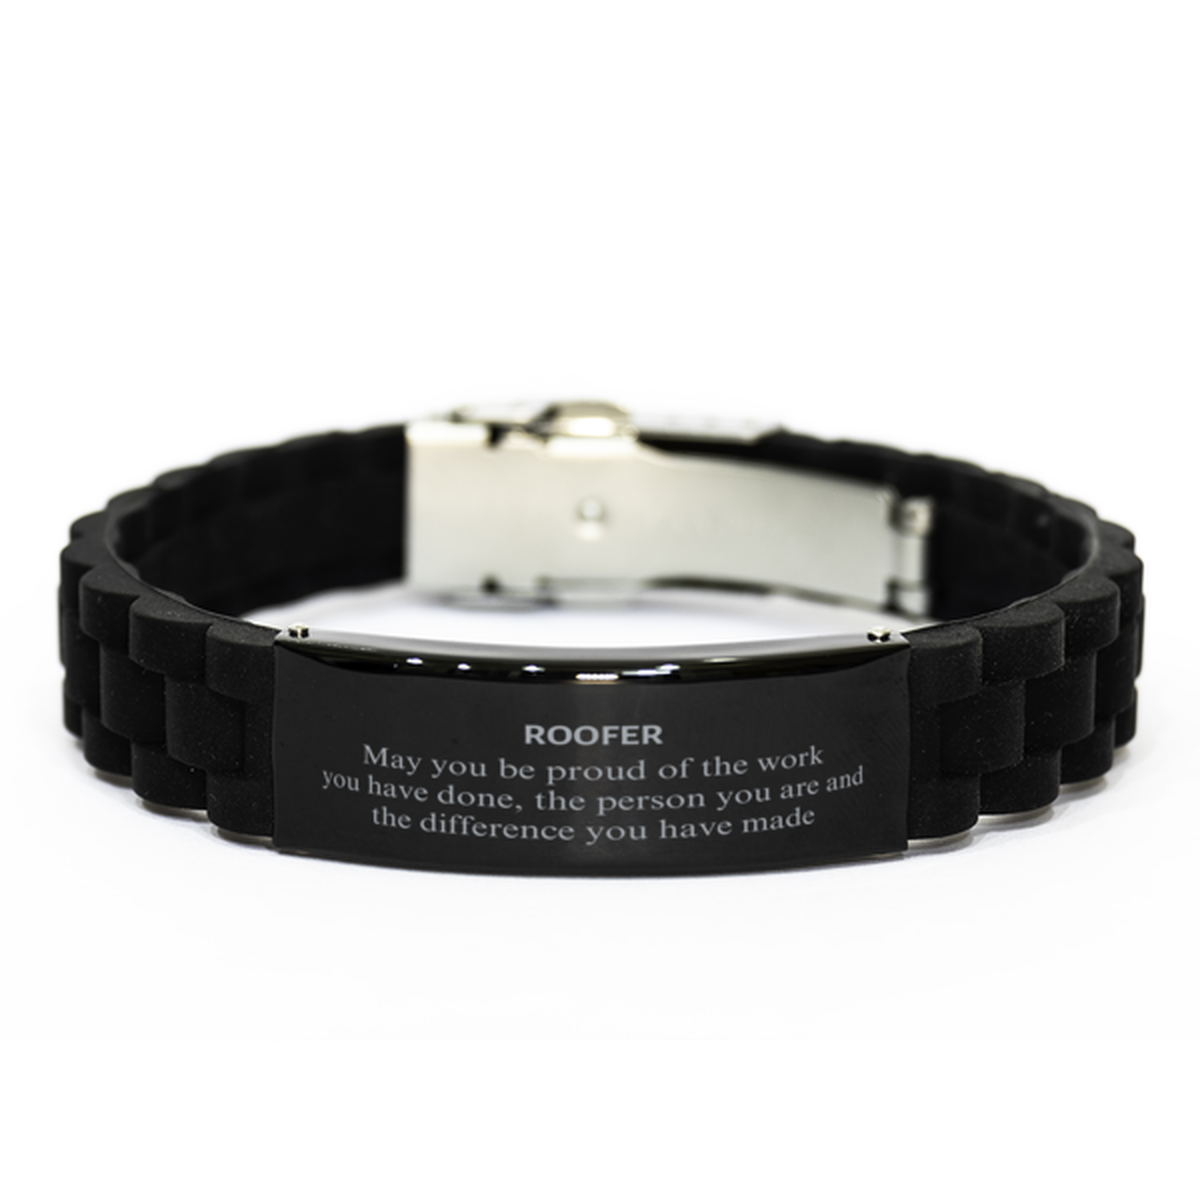 Roofer May you be proud of the work you have done, Retirement Roofer Black Glidelock Clasp Bracelet for Colleague Appreciation Gifts Amazing for Roofer